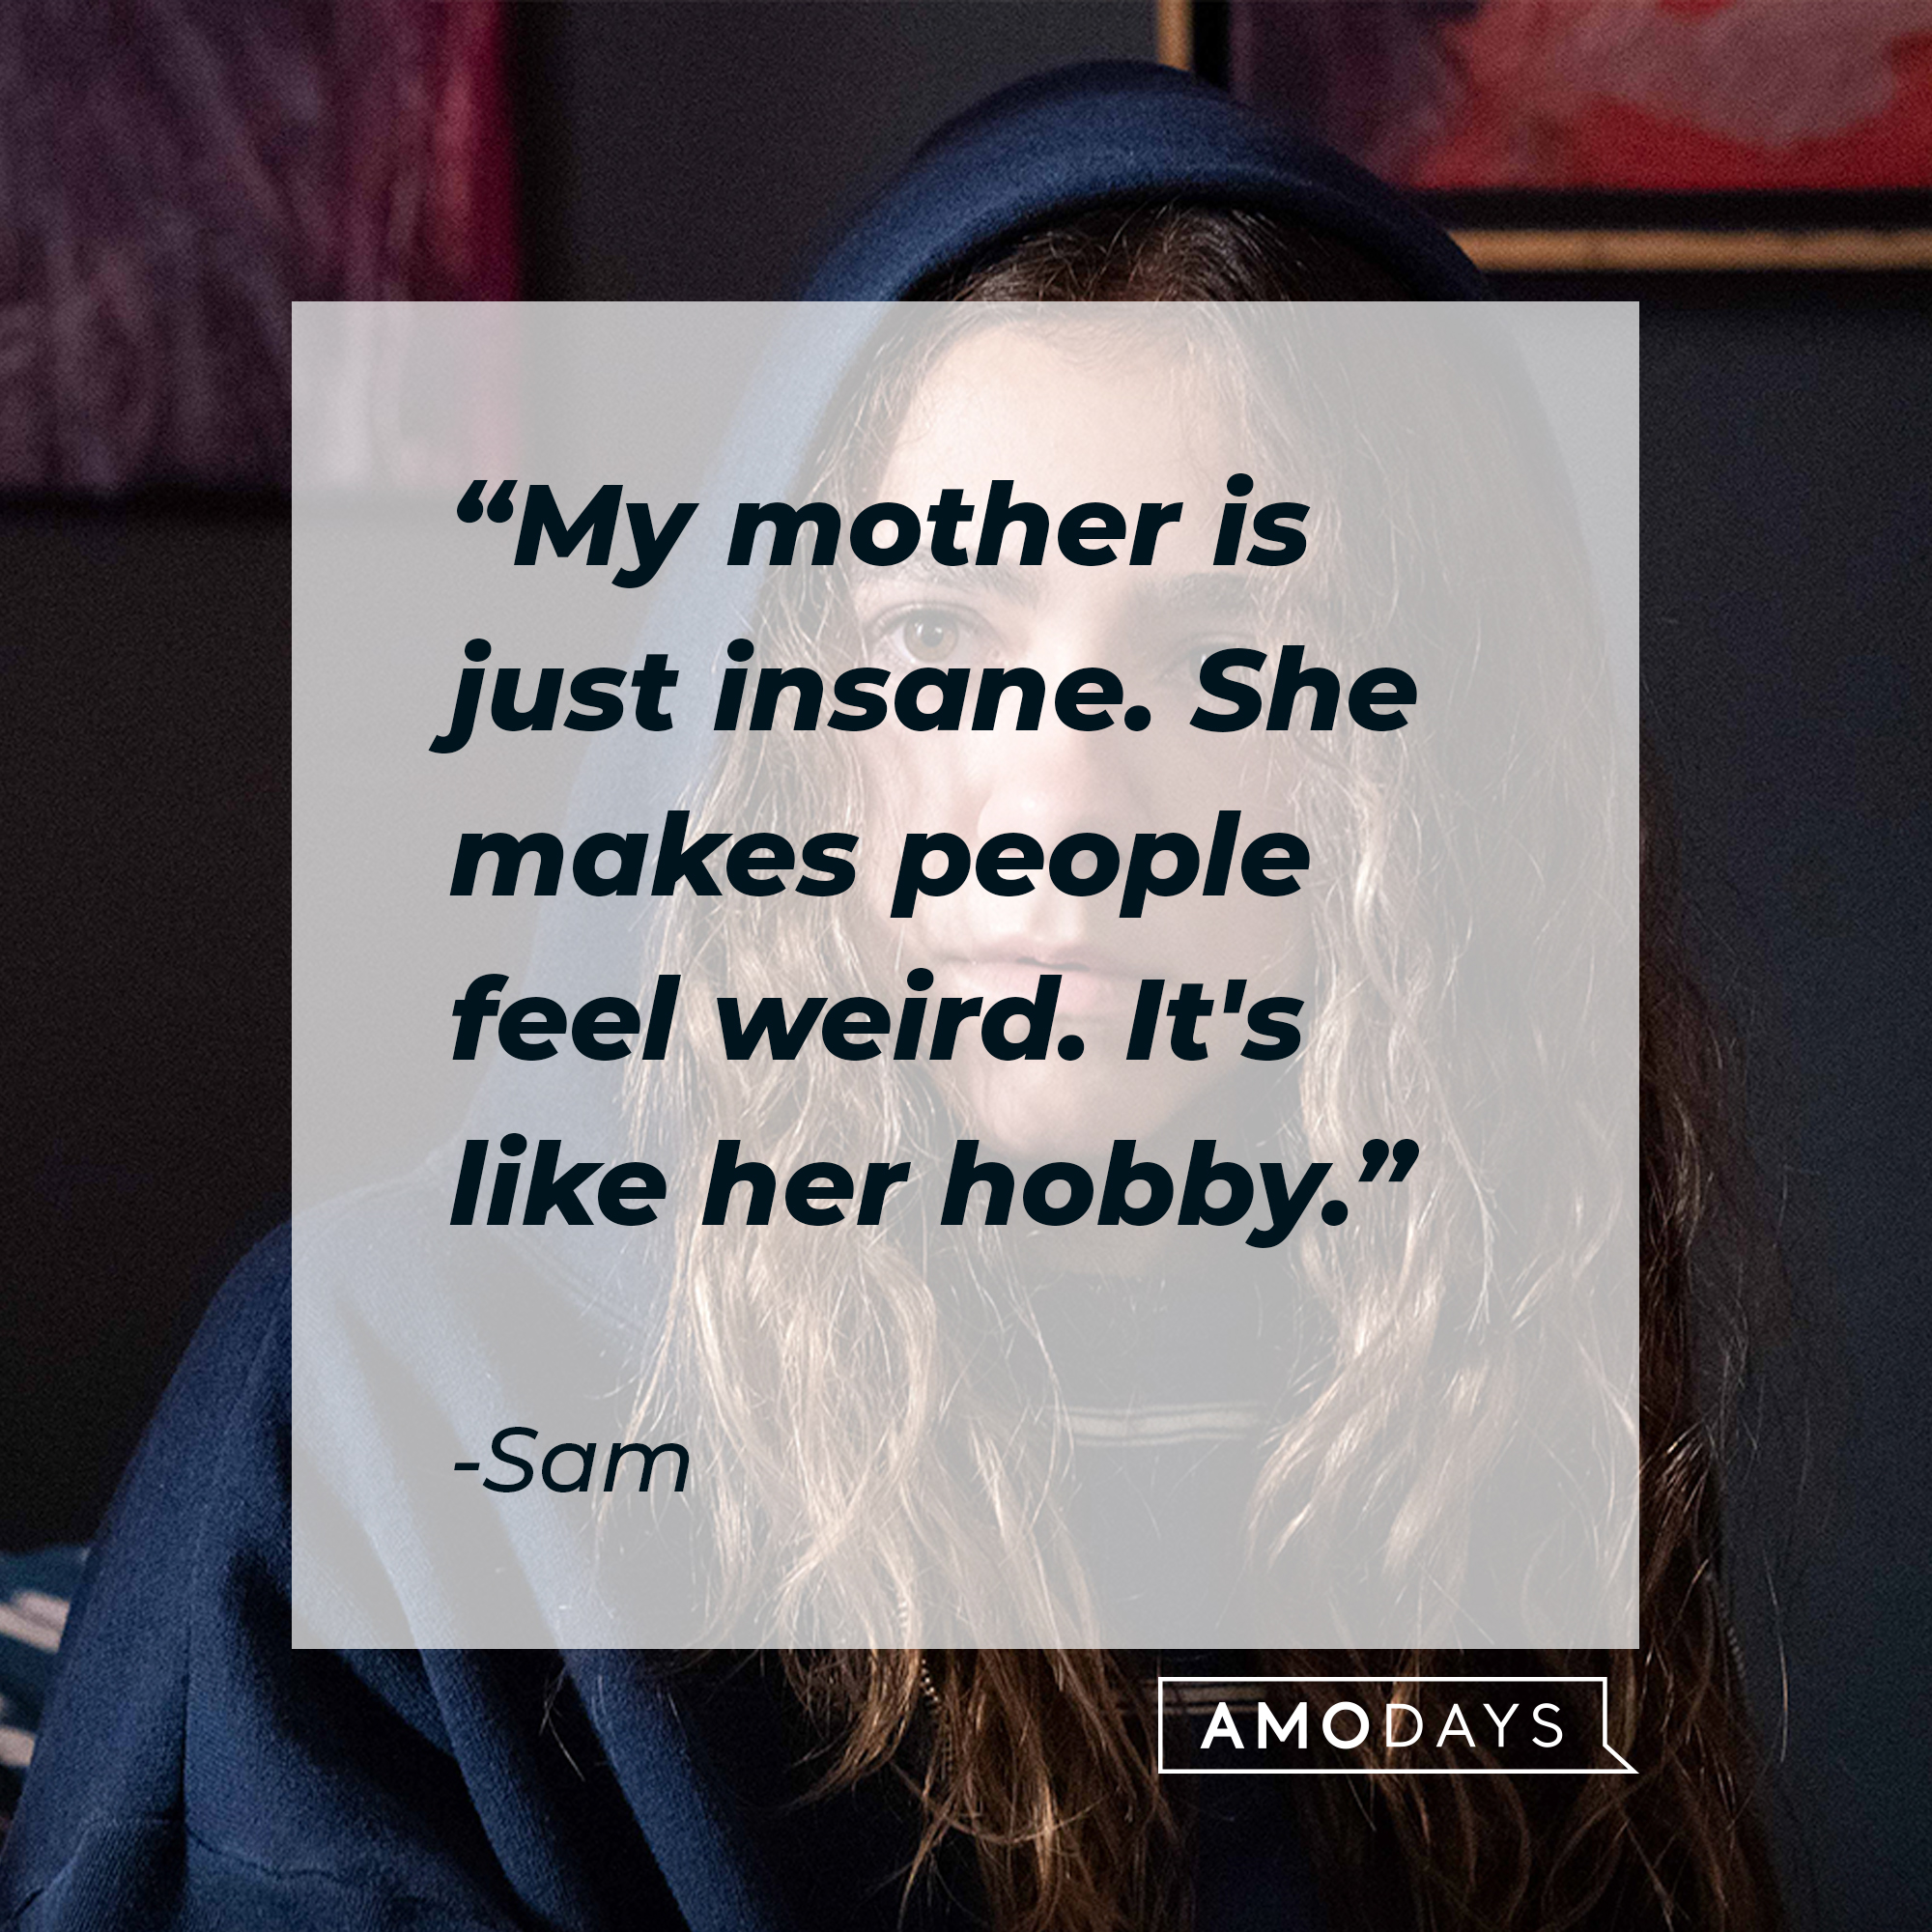 Sam's quote: "My mother is just insane. She makes people feel weird. It's like her hobby." | Source: facebook.com/BetterThingsFX